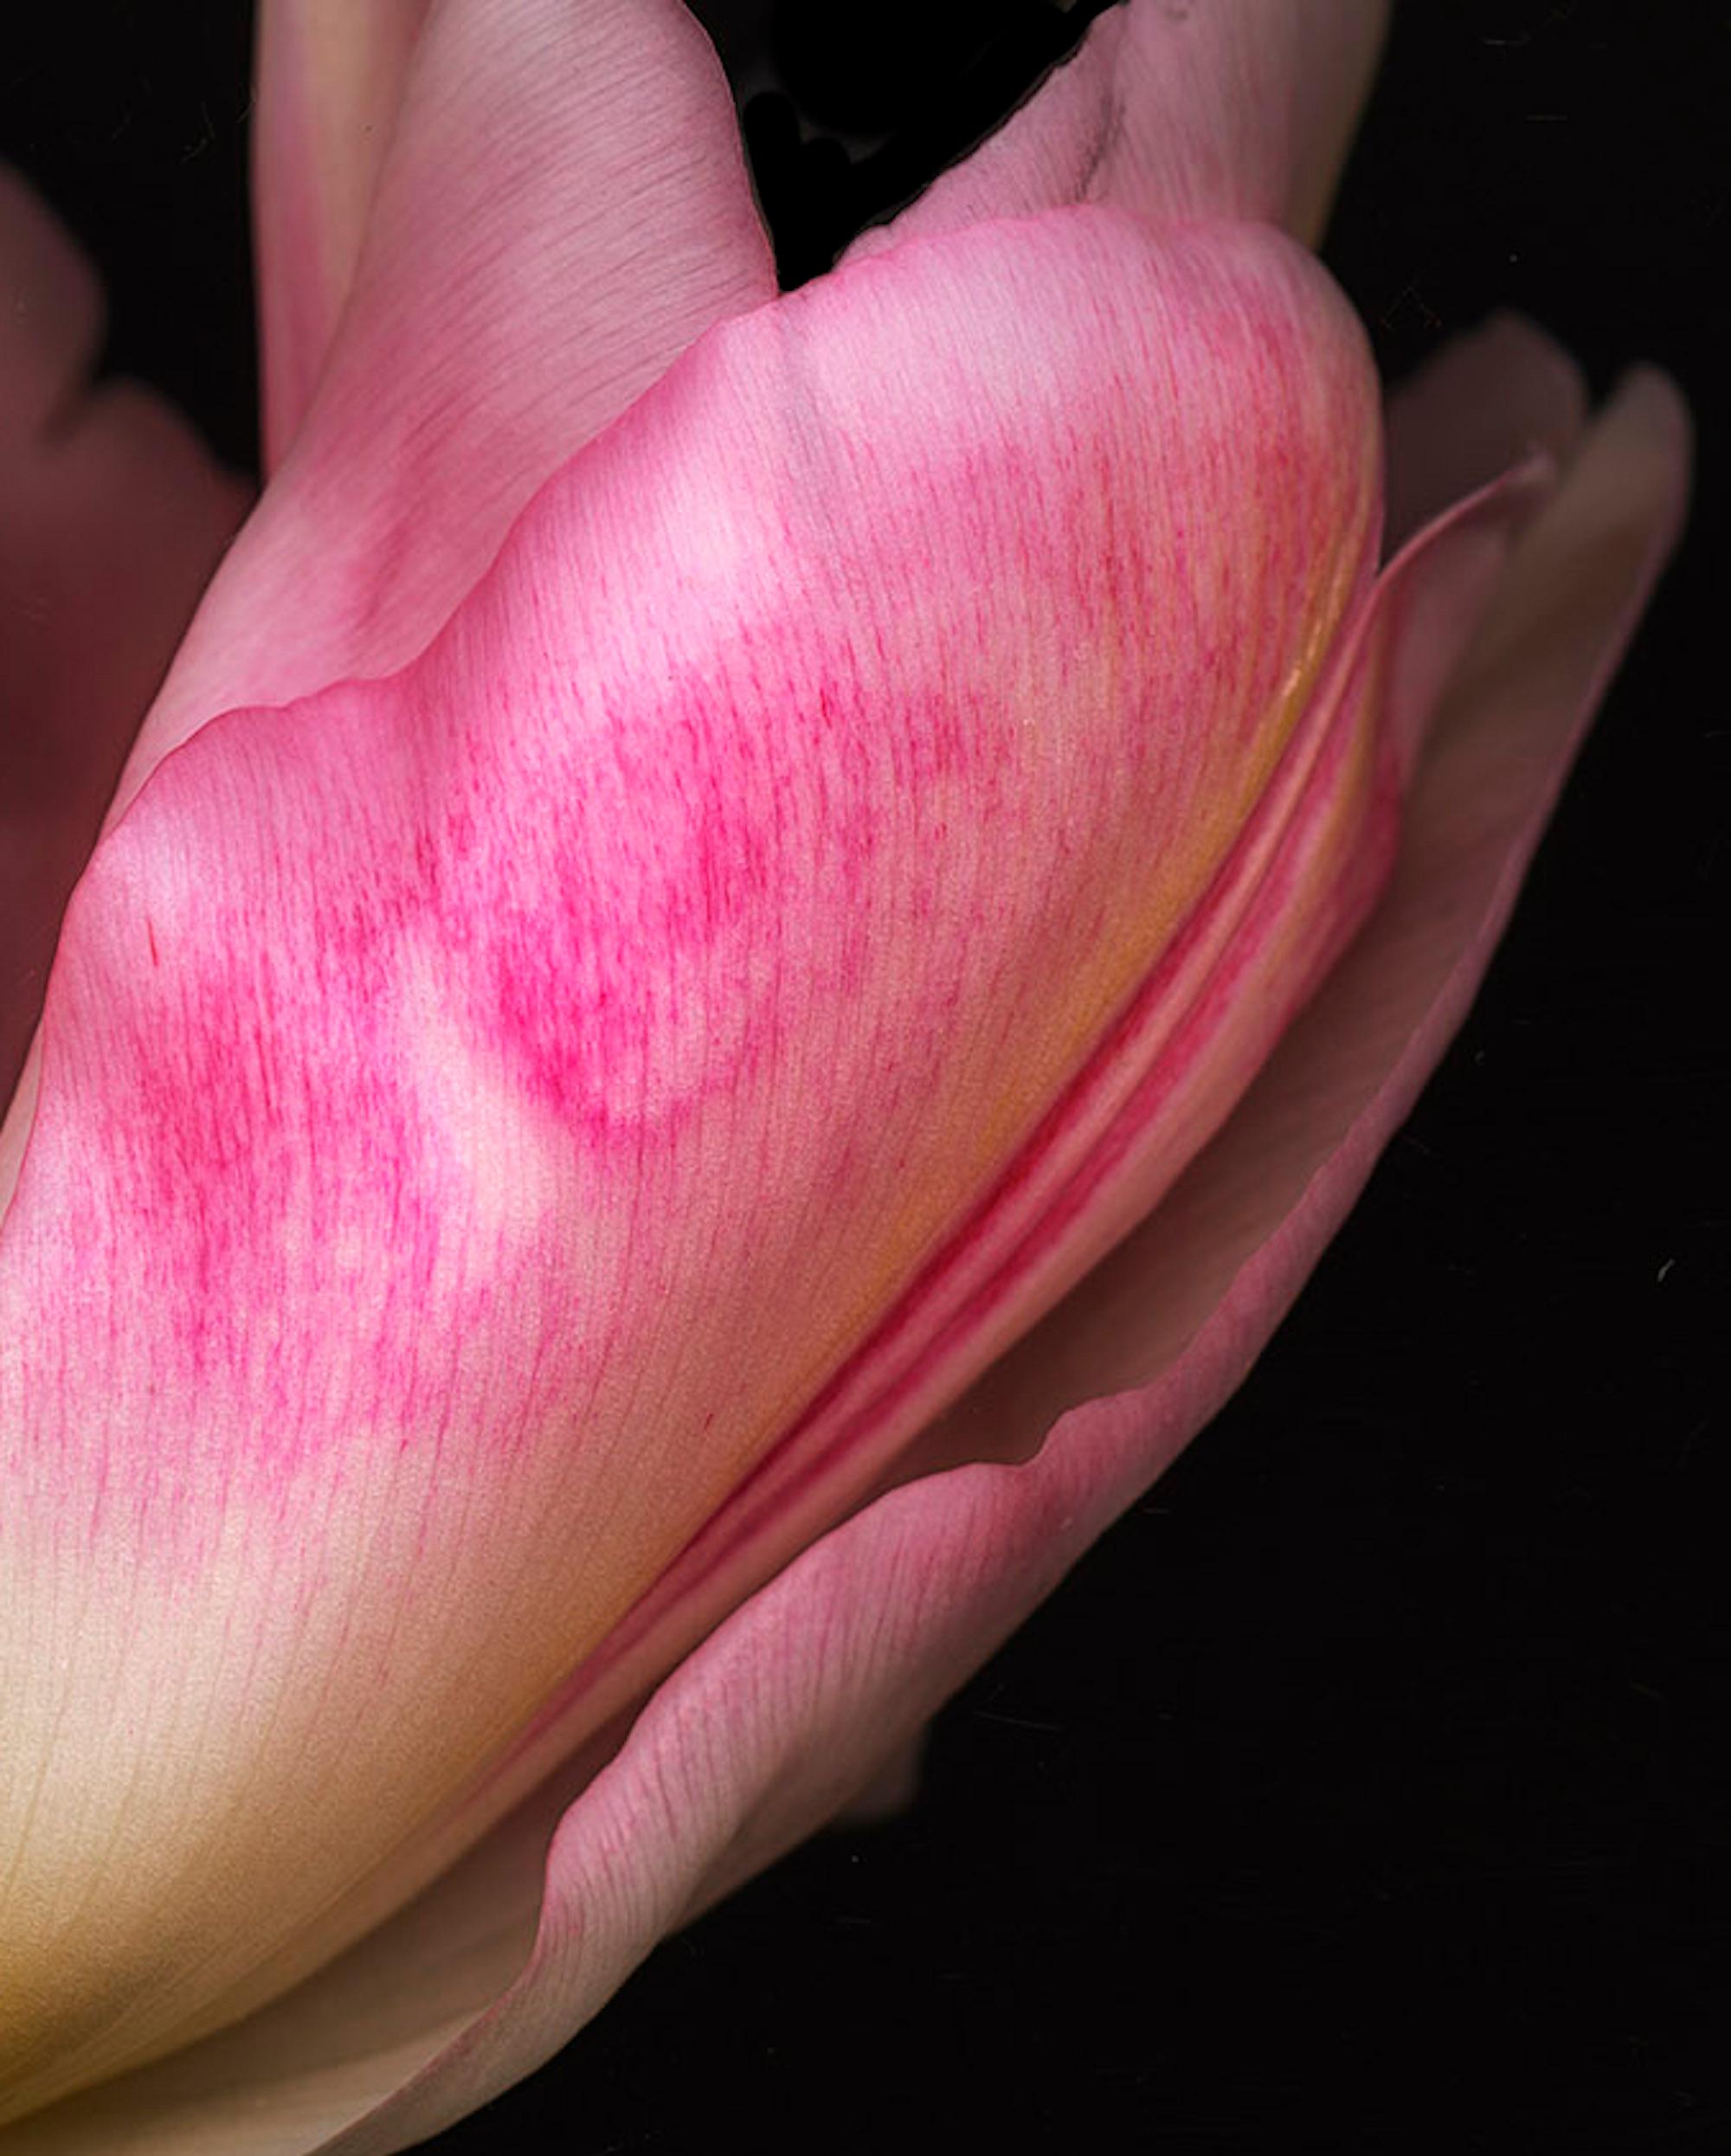 Ghost Flower No 8, floral photography, pink art, limited edition print - Black Color Photograph by Allan Forsyth